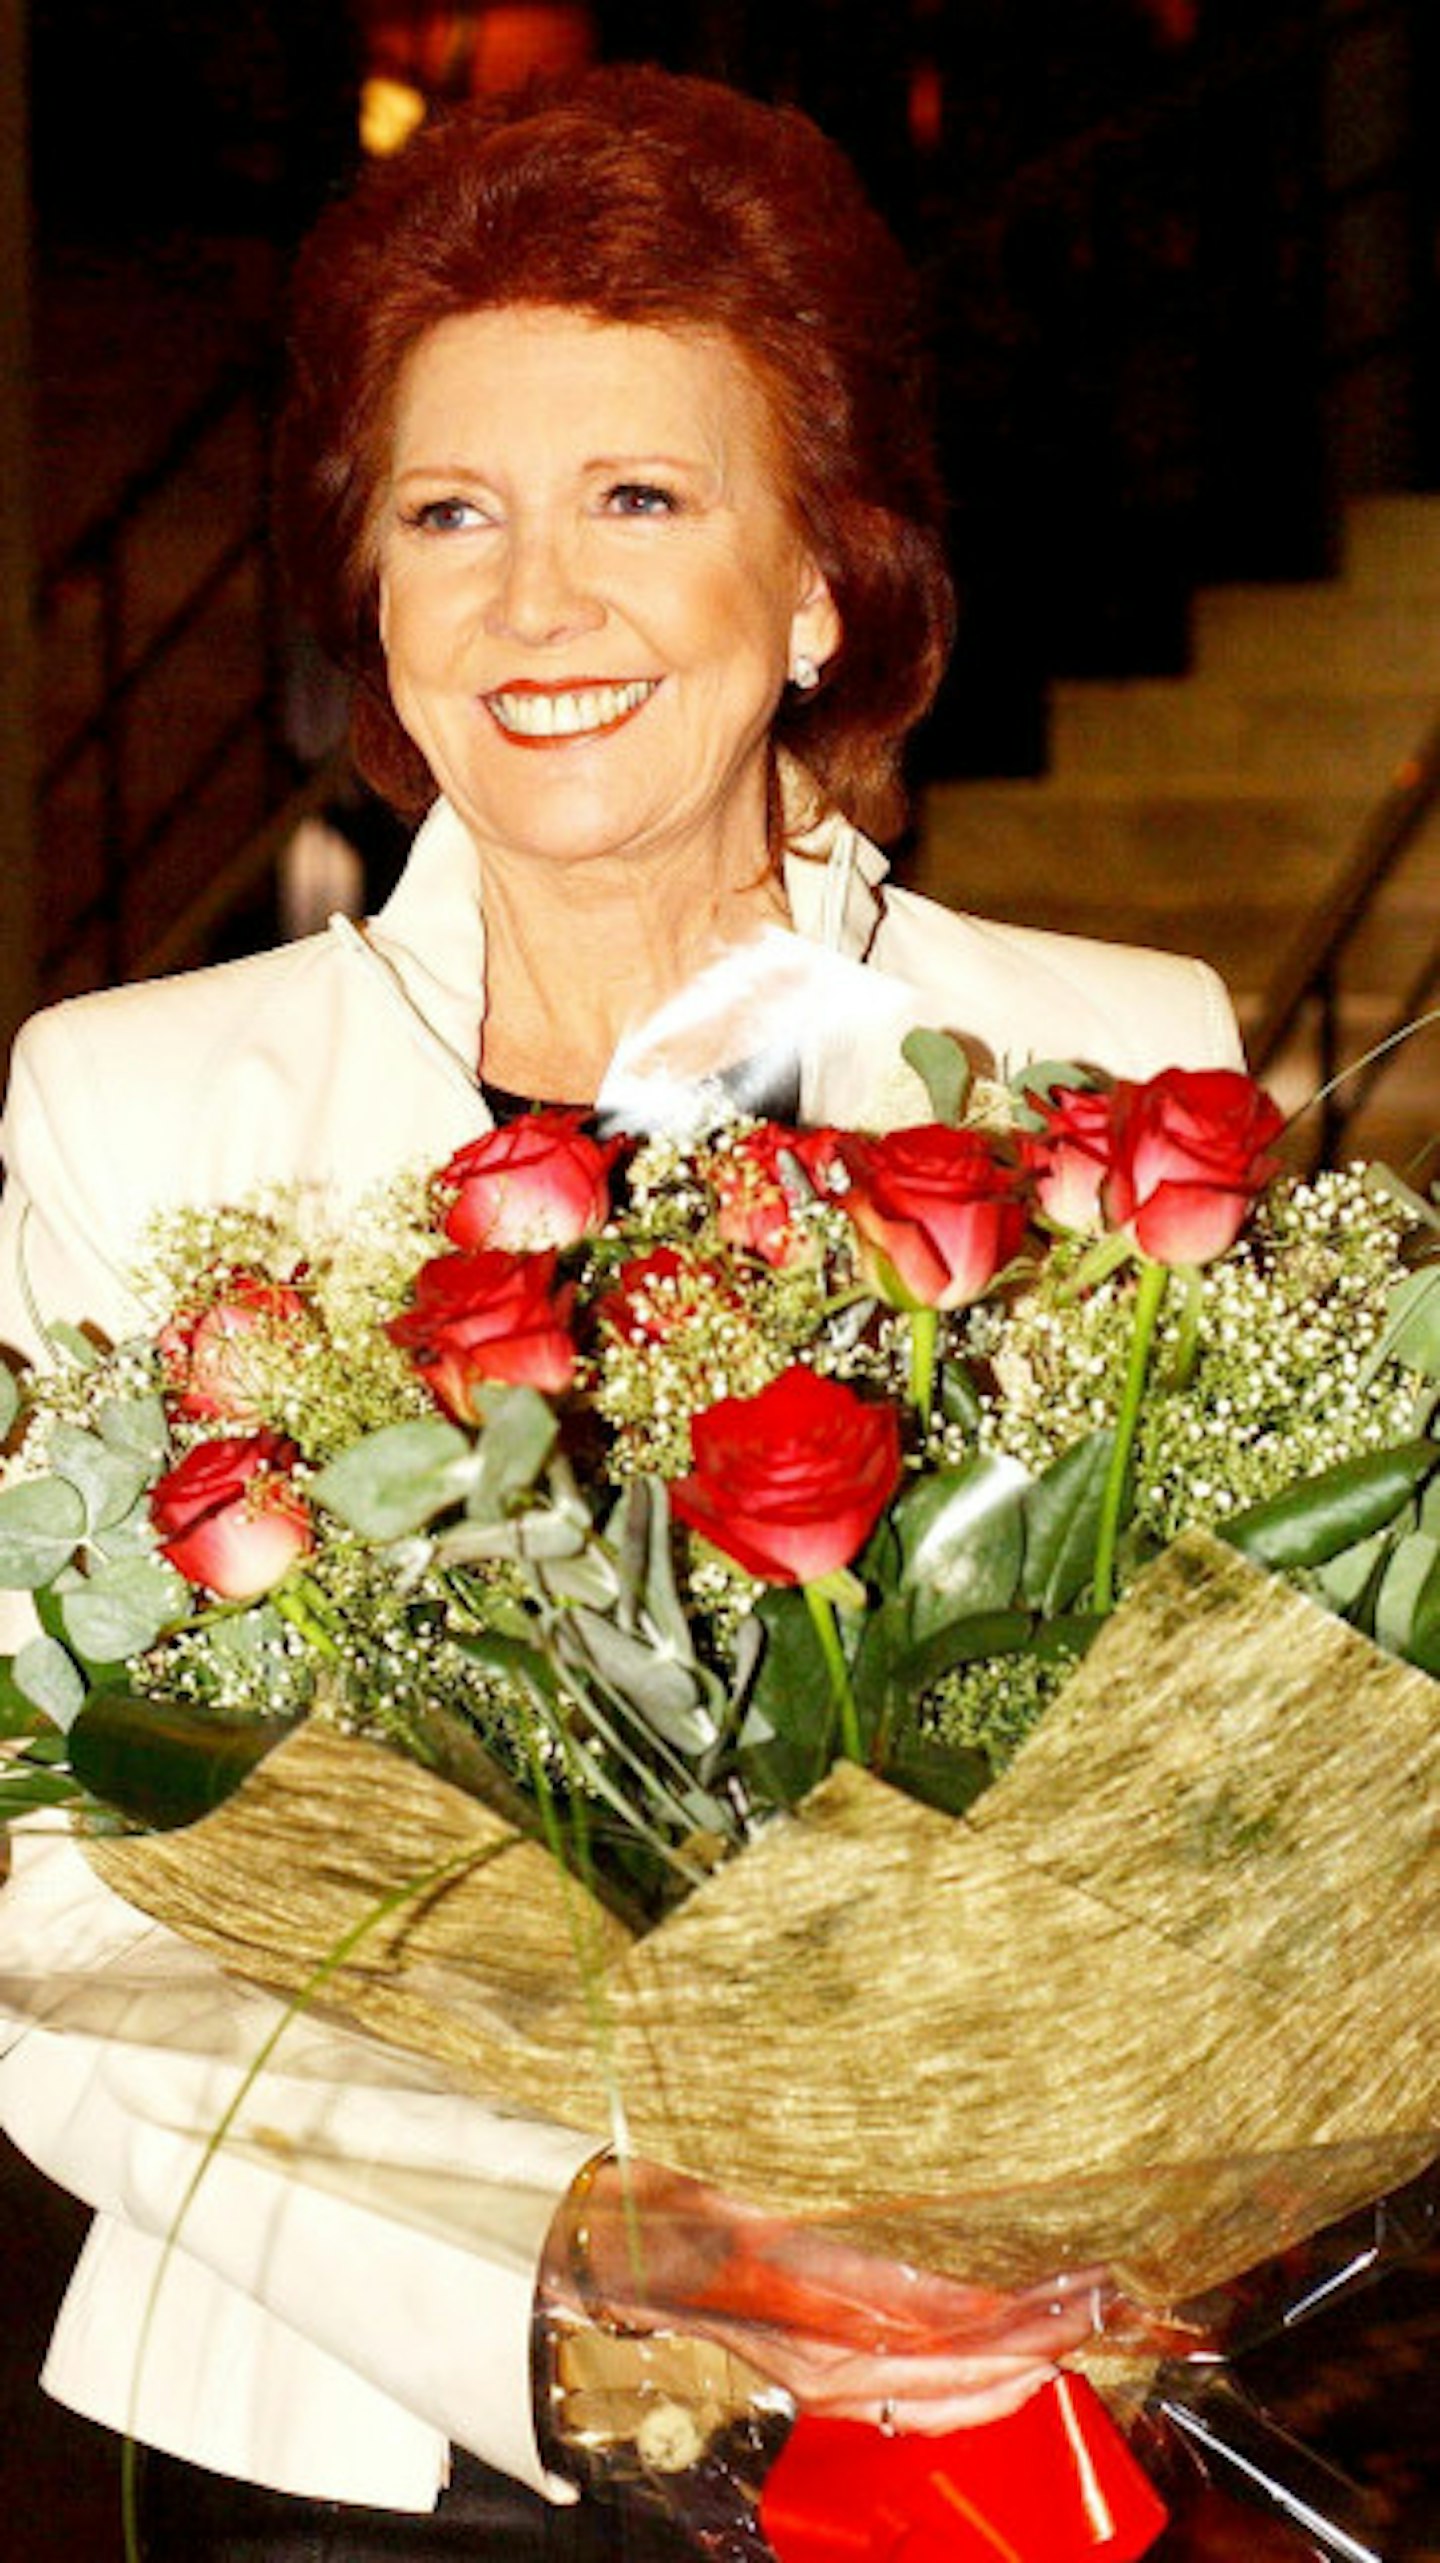 Cilla has scores of fans around the world